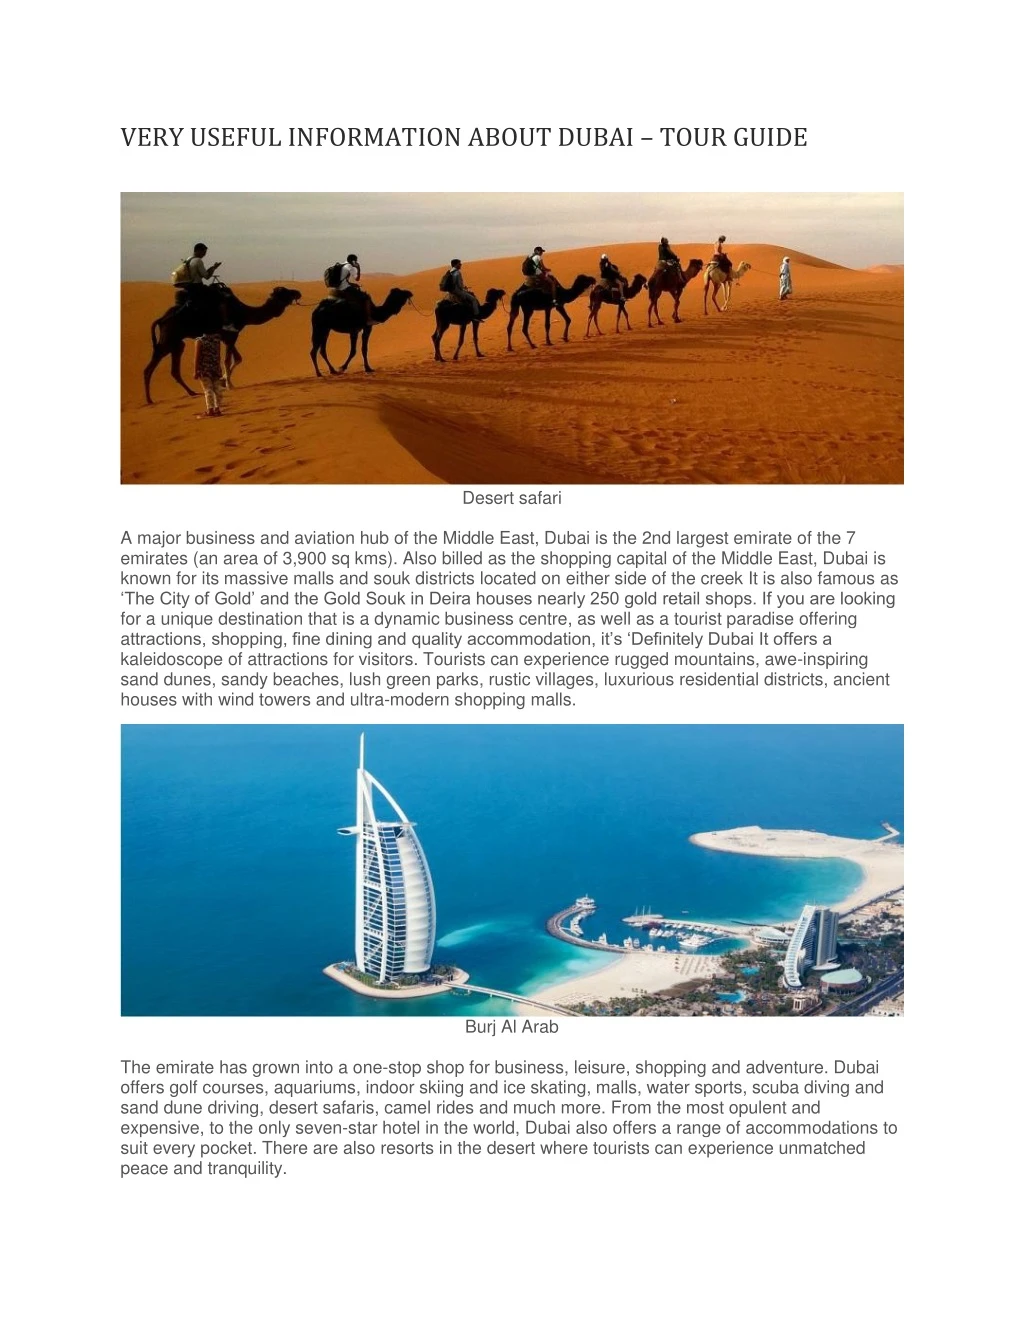 very useful information about dubai tour guide